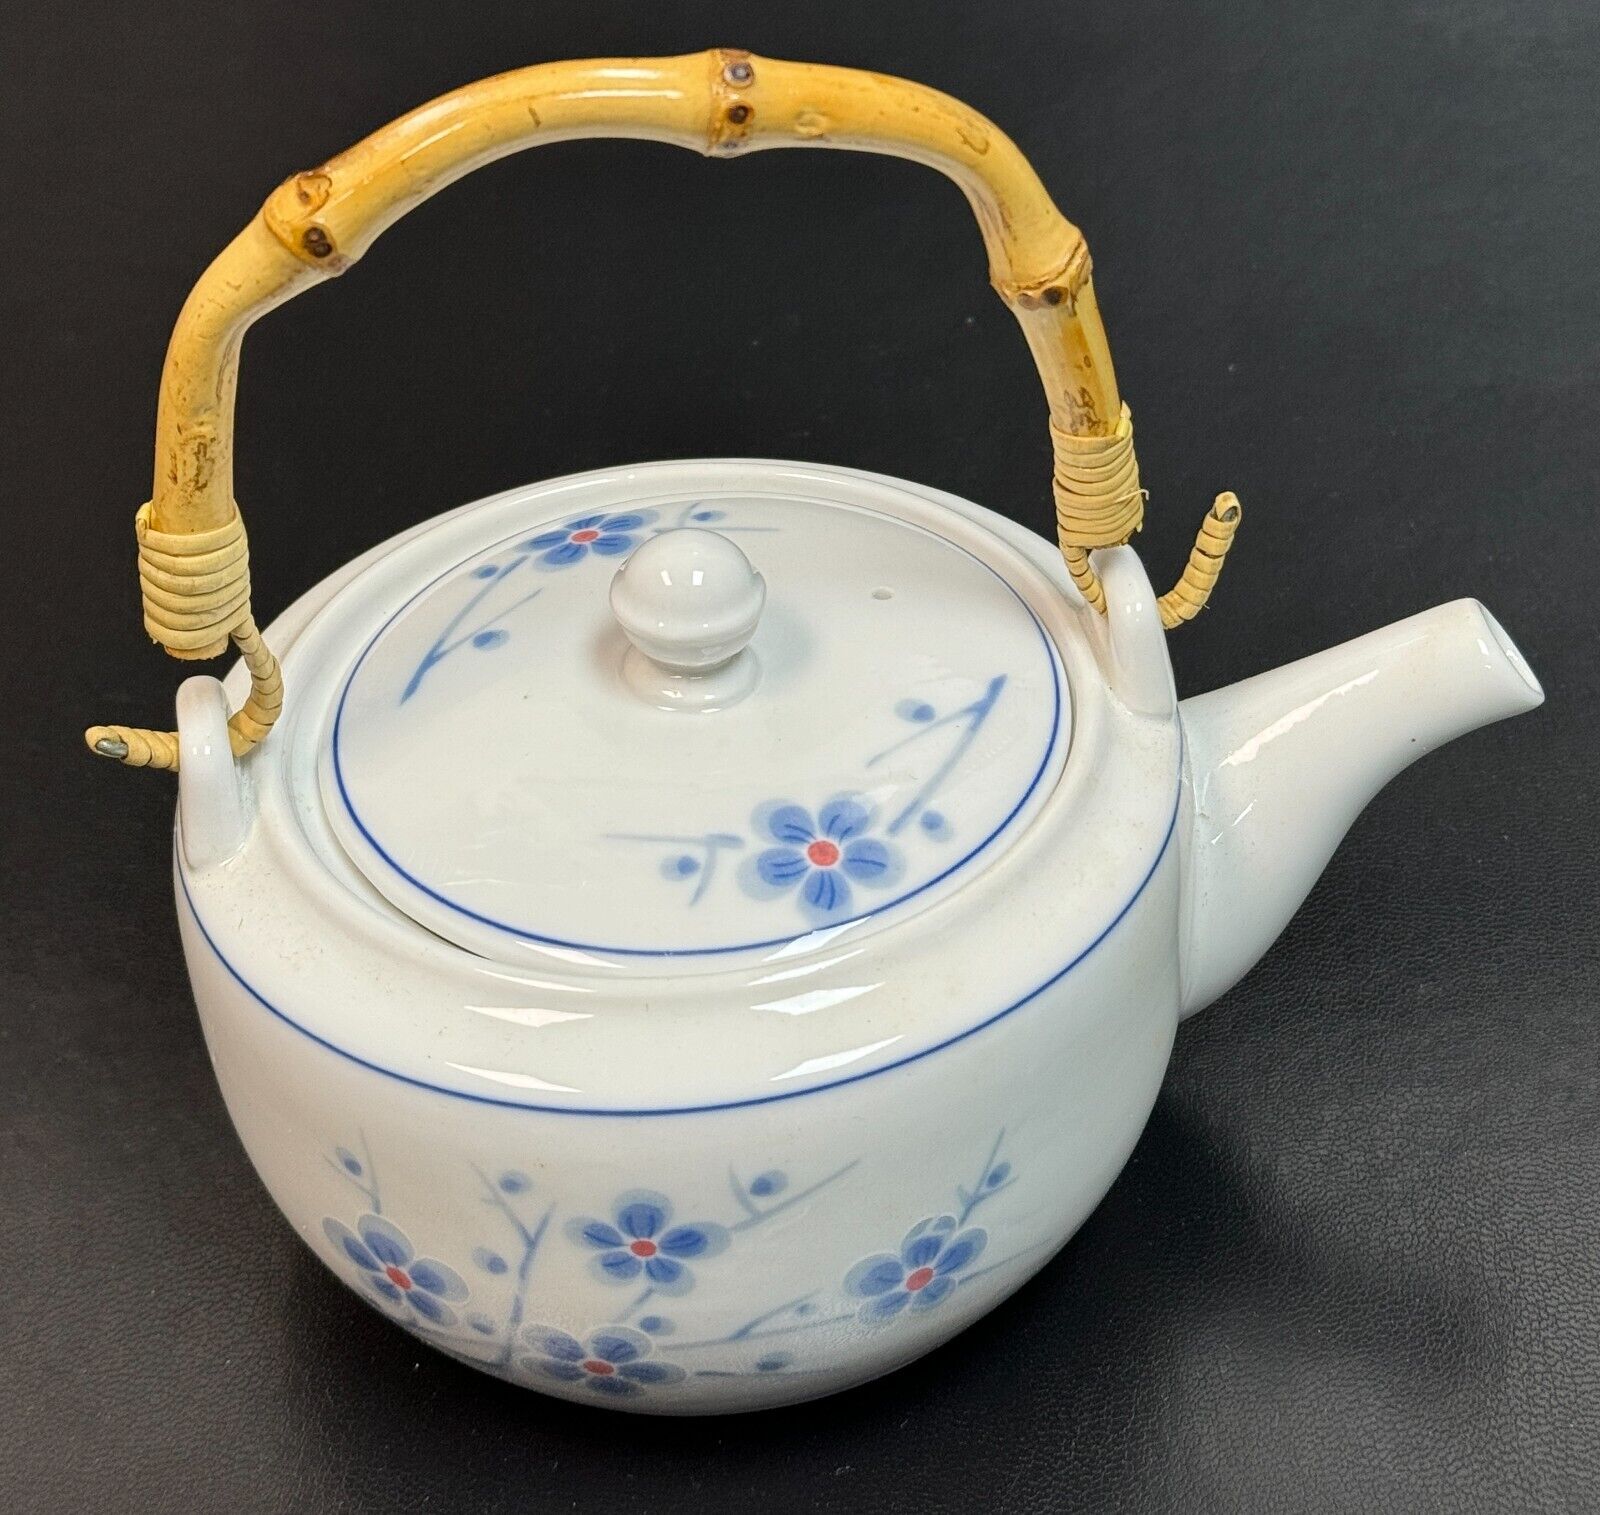 Cheng's White Jade Porcelain Tea Pot  White Cherry Blossom with Bamboo Handle